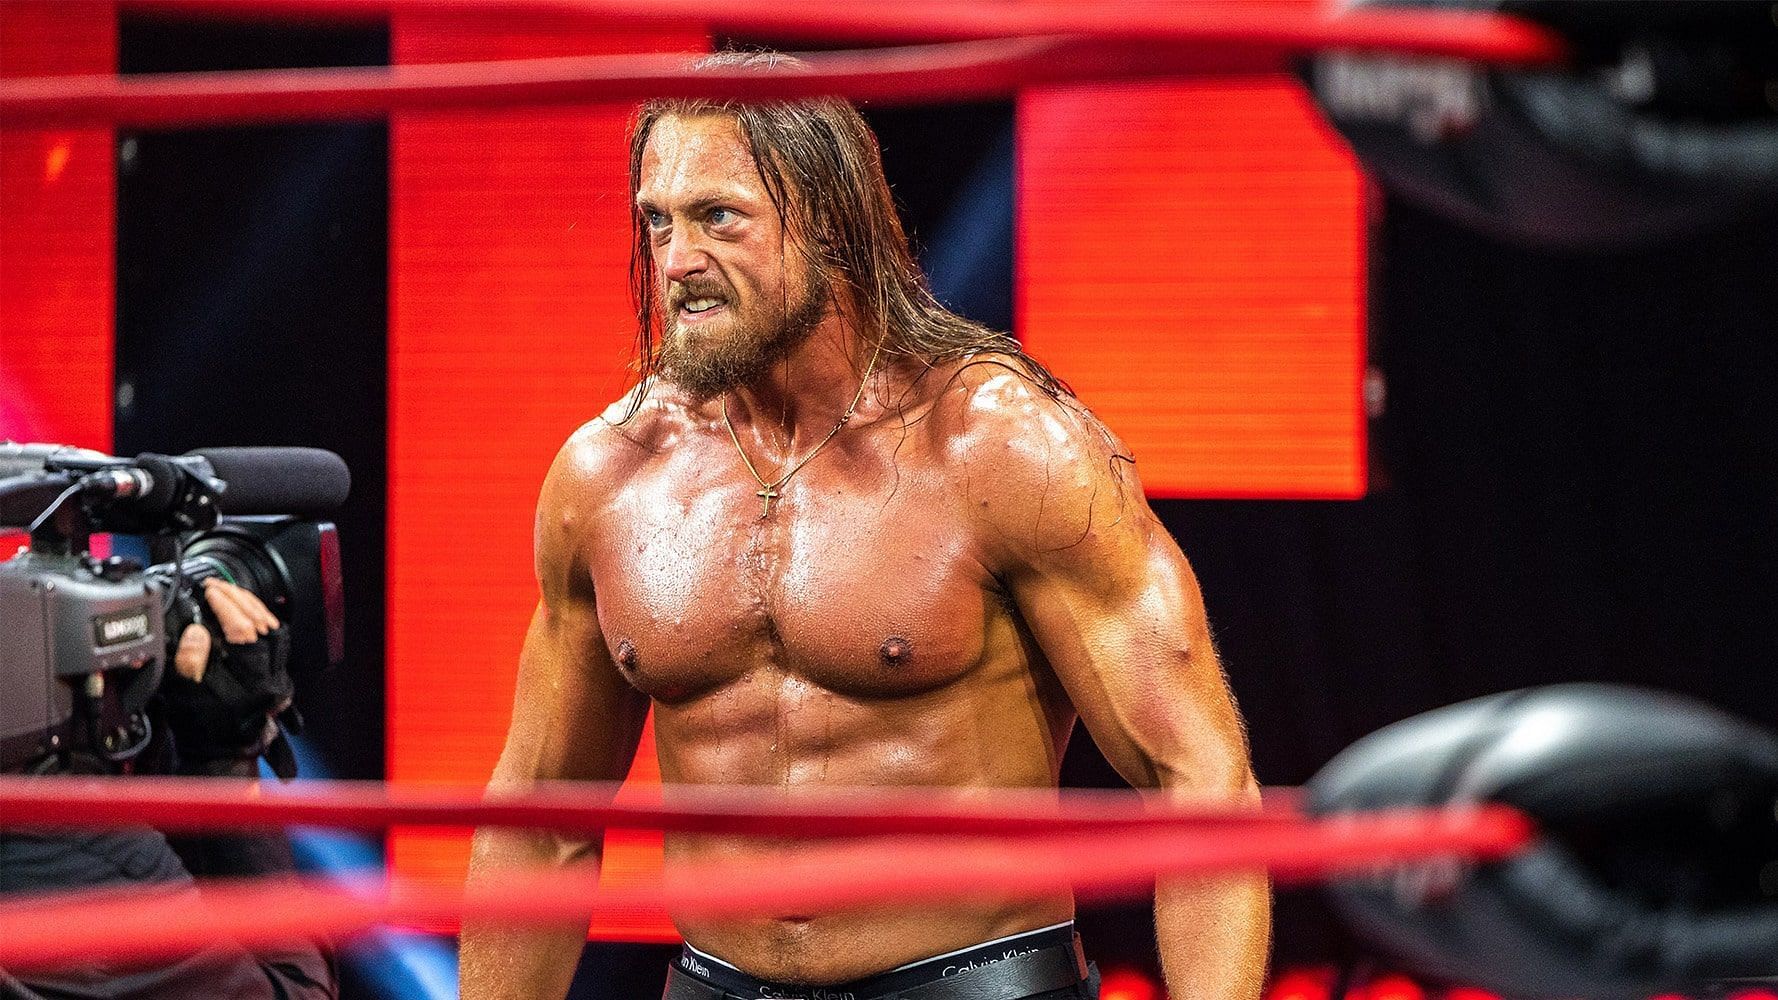 The former Big Cass has impressed some important people